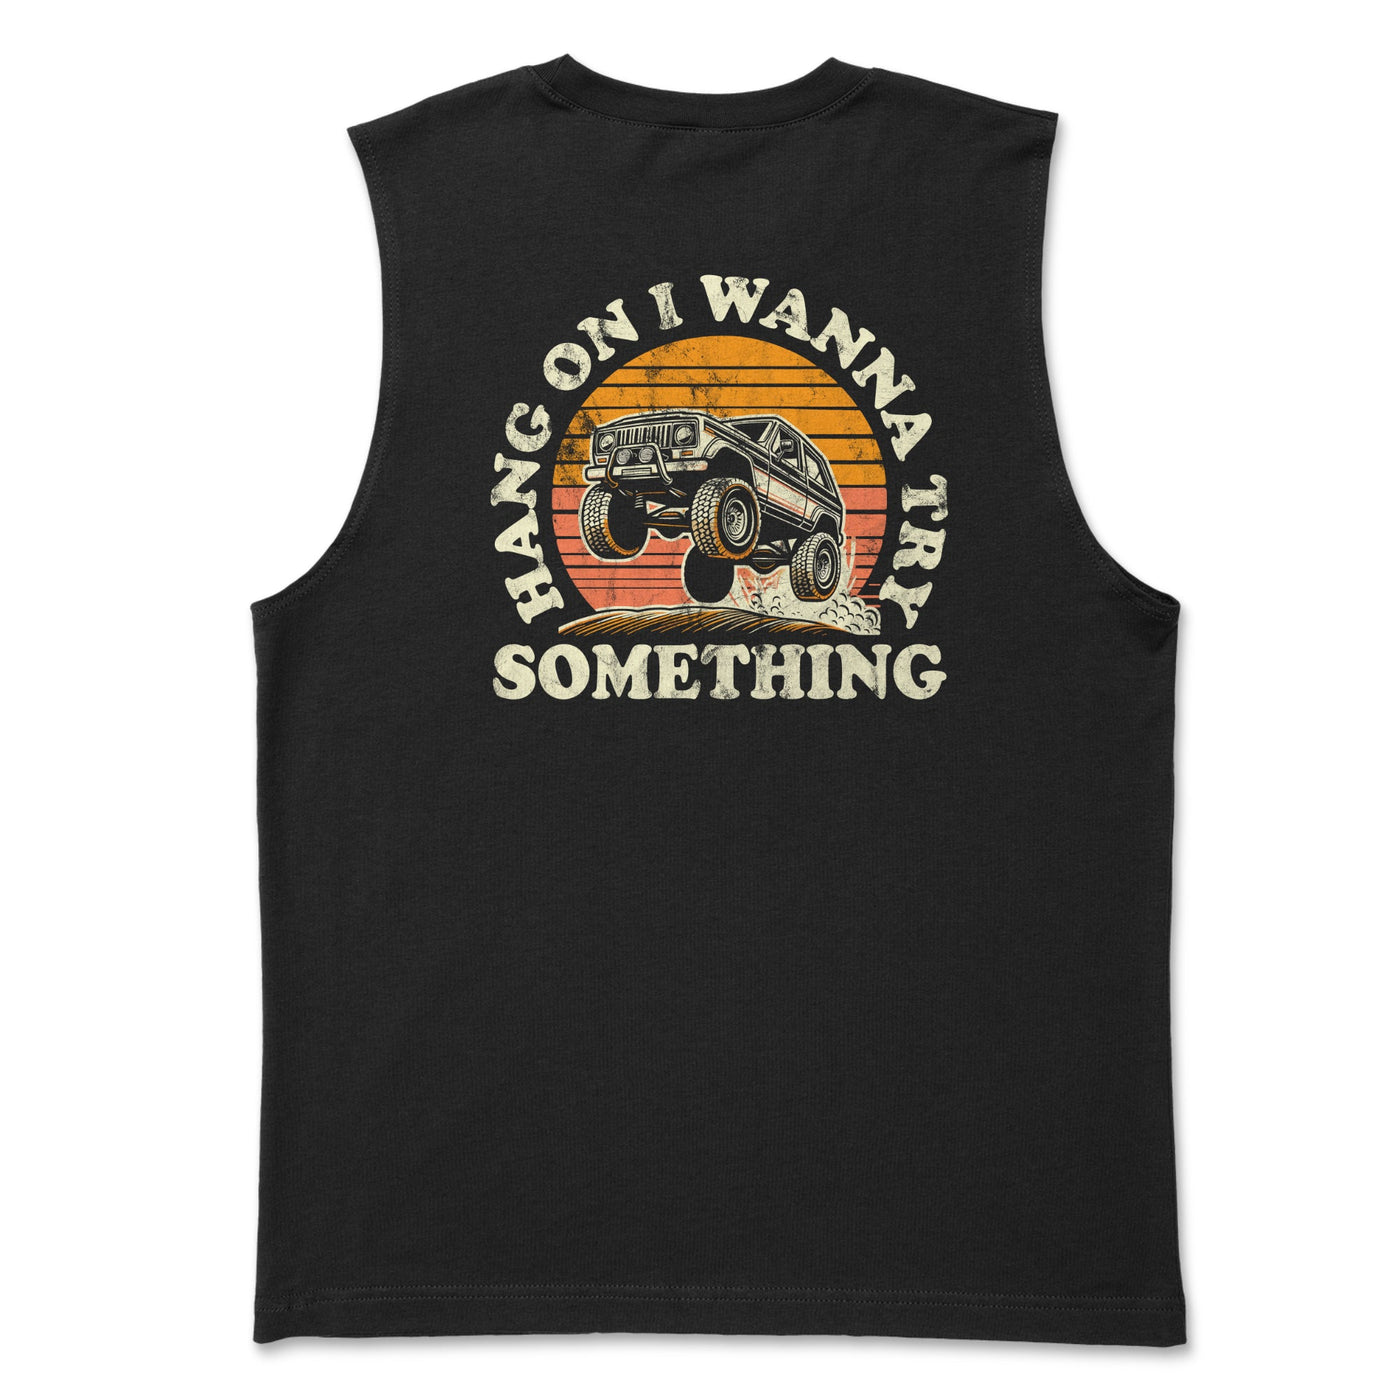 Men's Muscle Tank Top-Offroad Hang On I Wanna Try Something - Goats Trail Off-Road Apparel Company